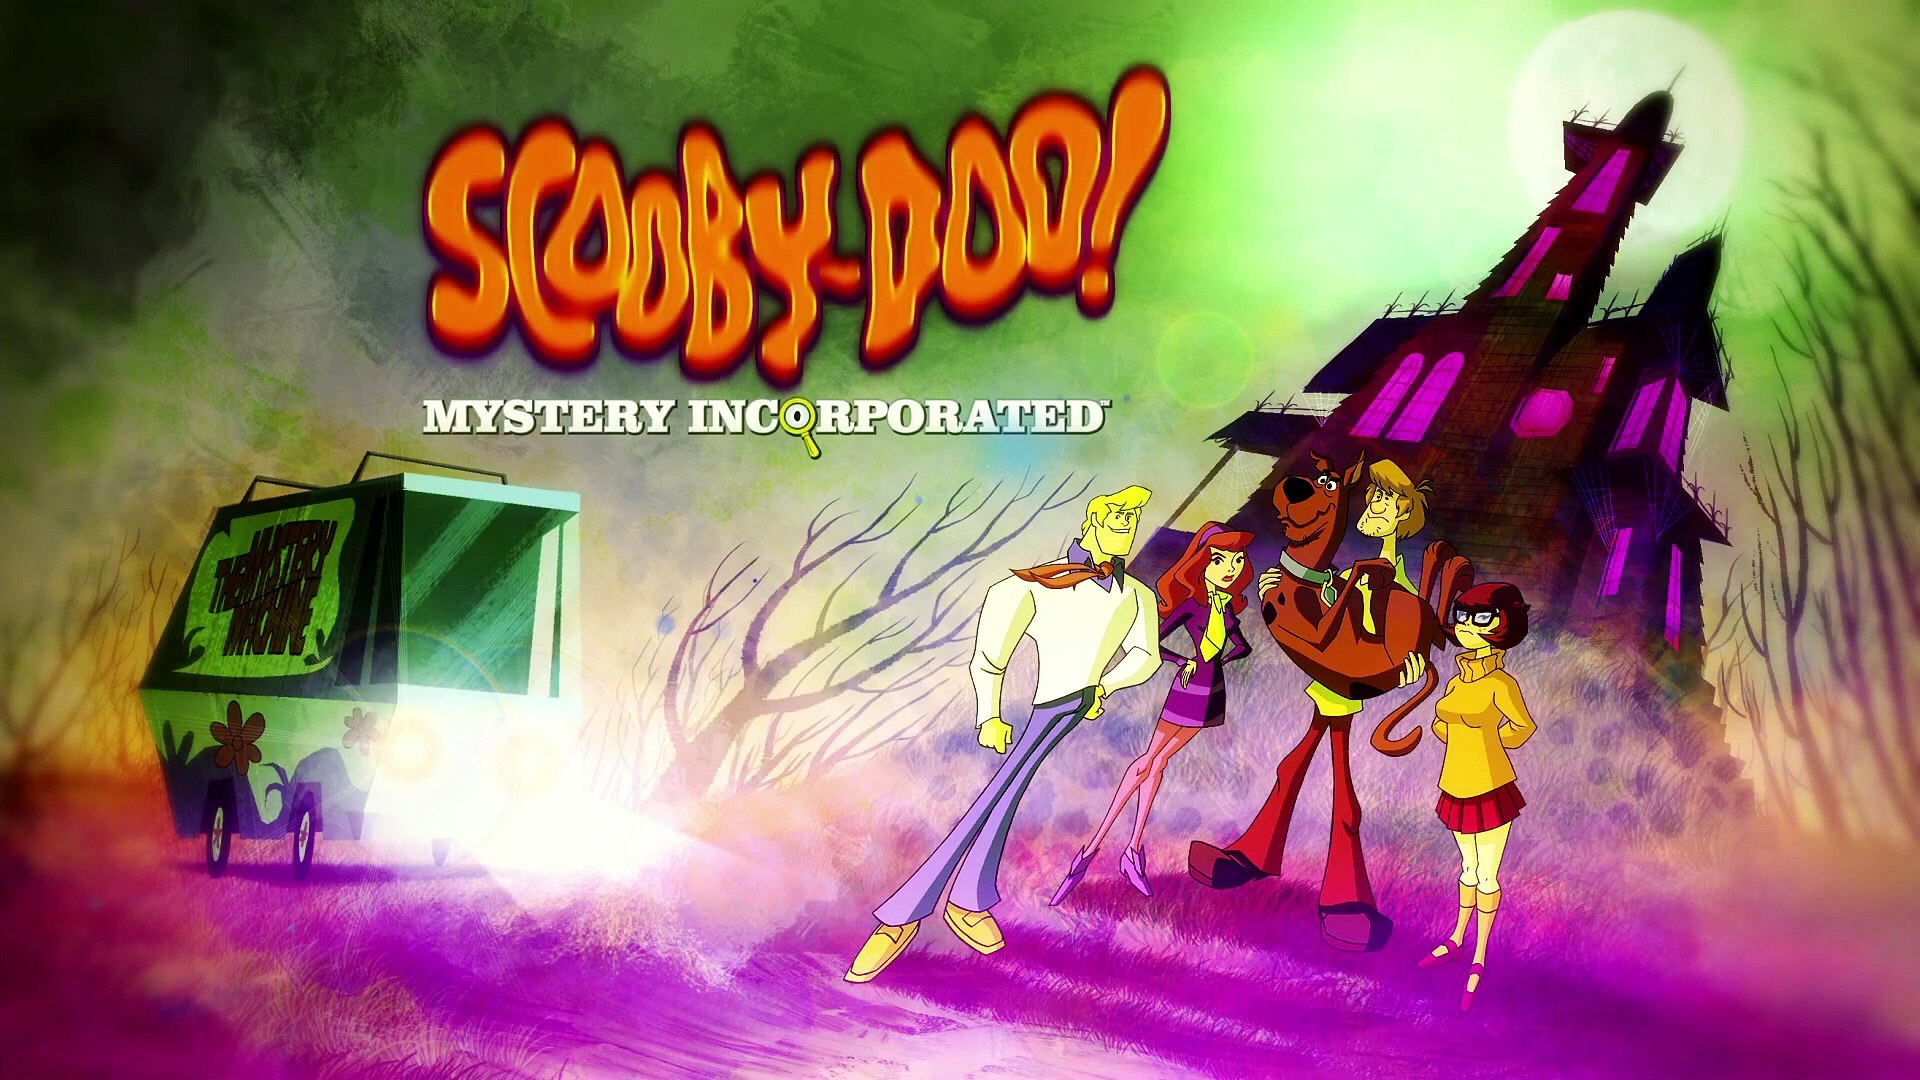 Scooby-Doo Mystery Incorporated S01 E02 The Creeping Creatures